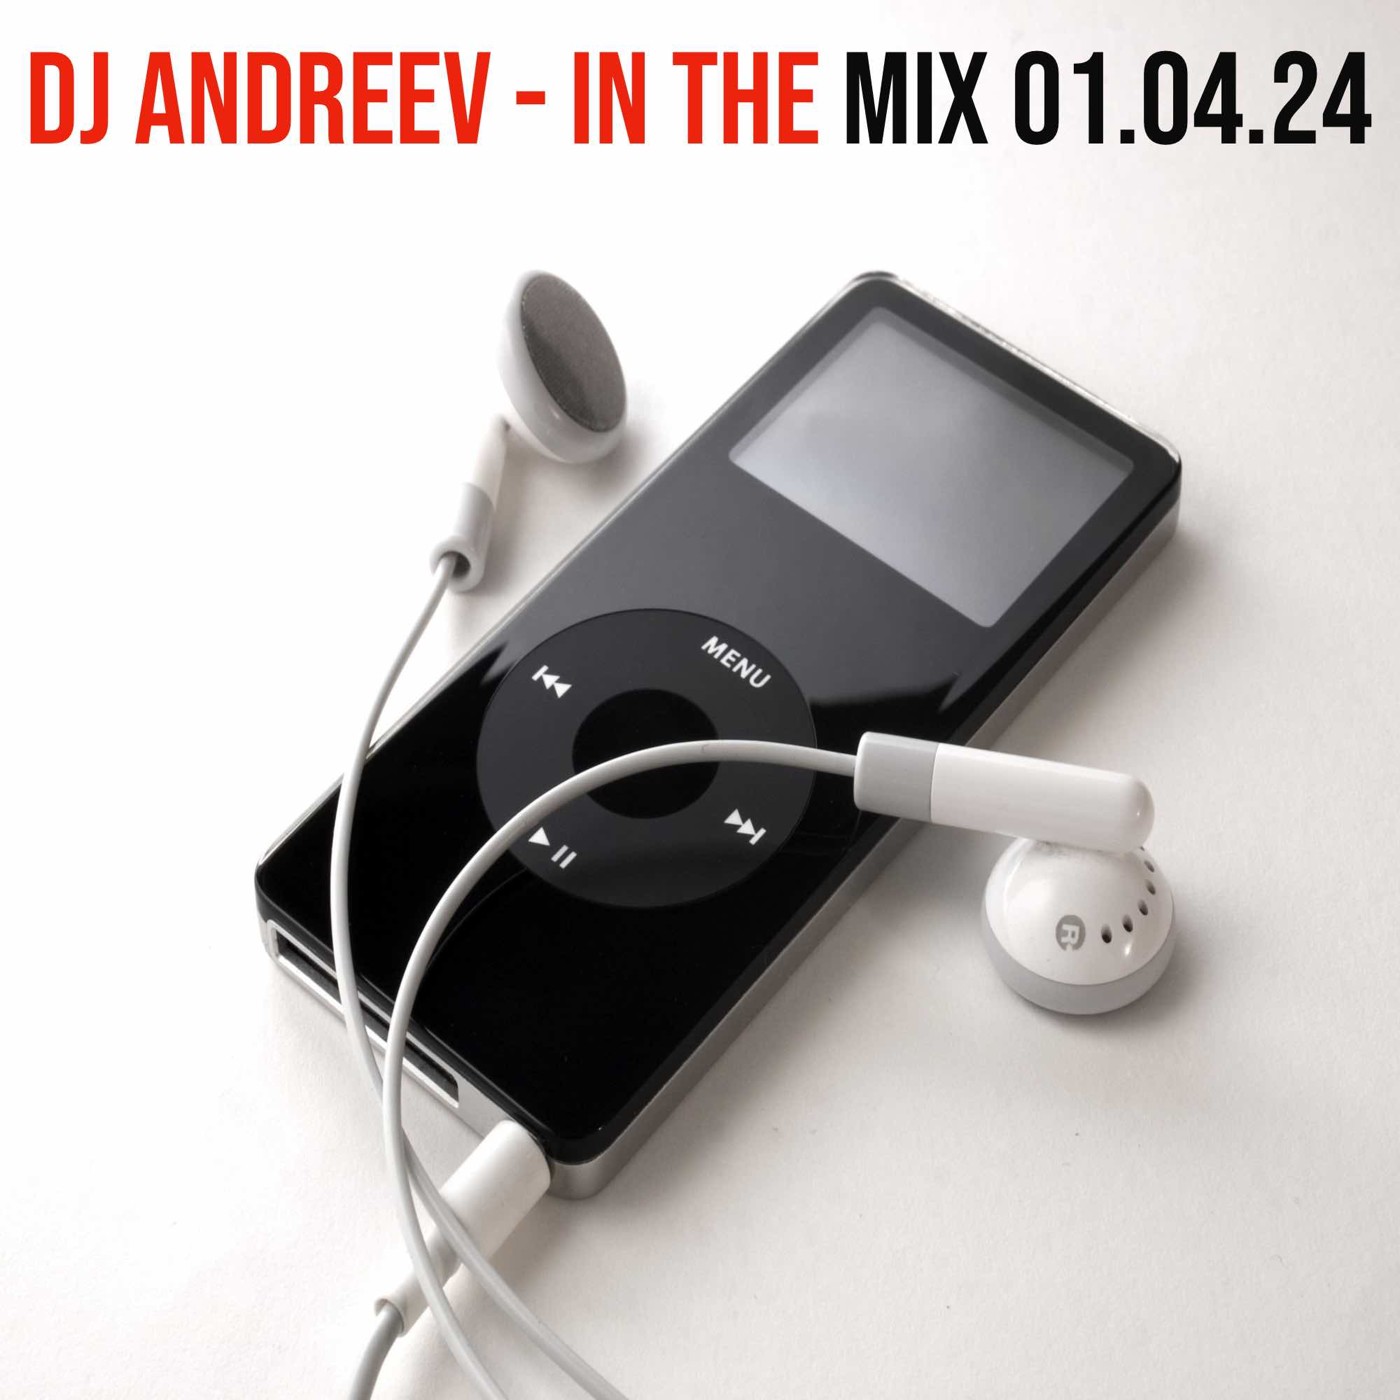 Dj Andreev - In The Mix 01.04.24